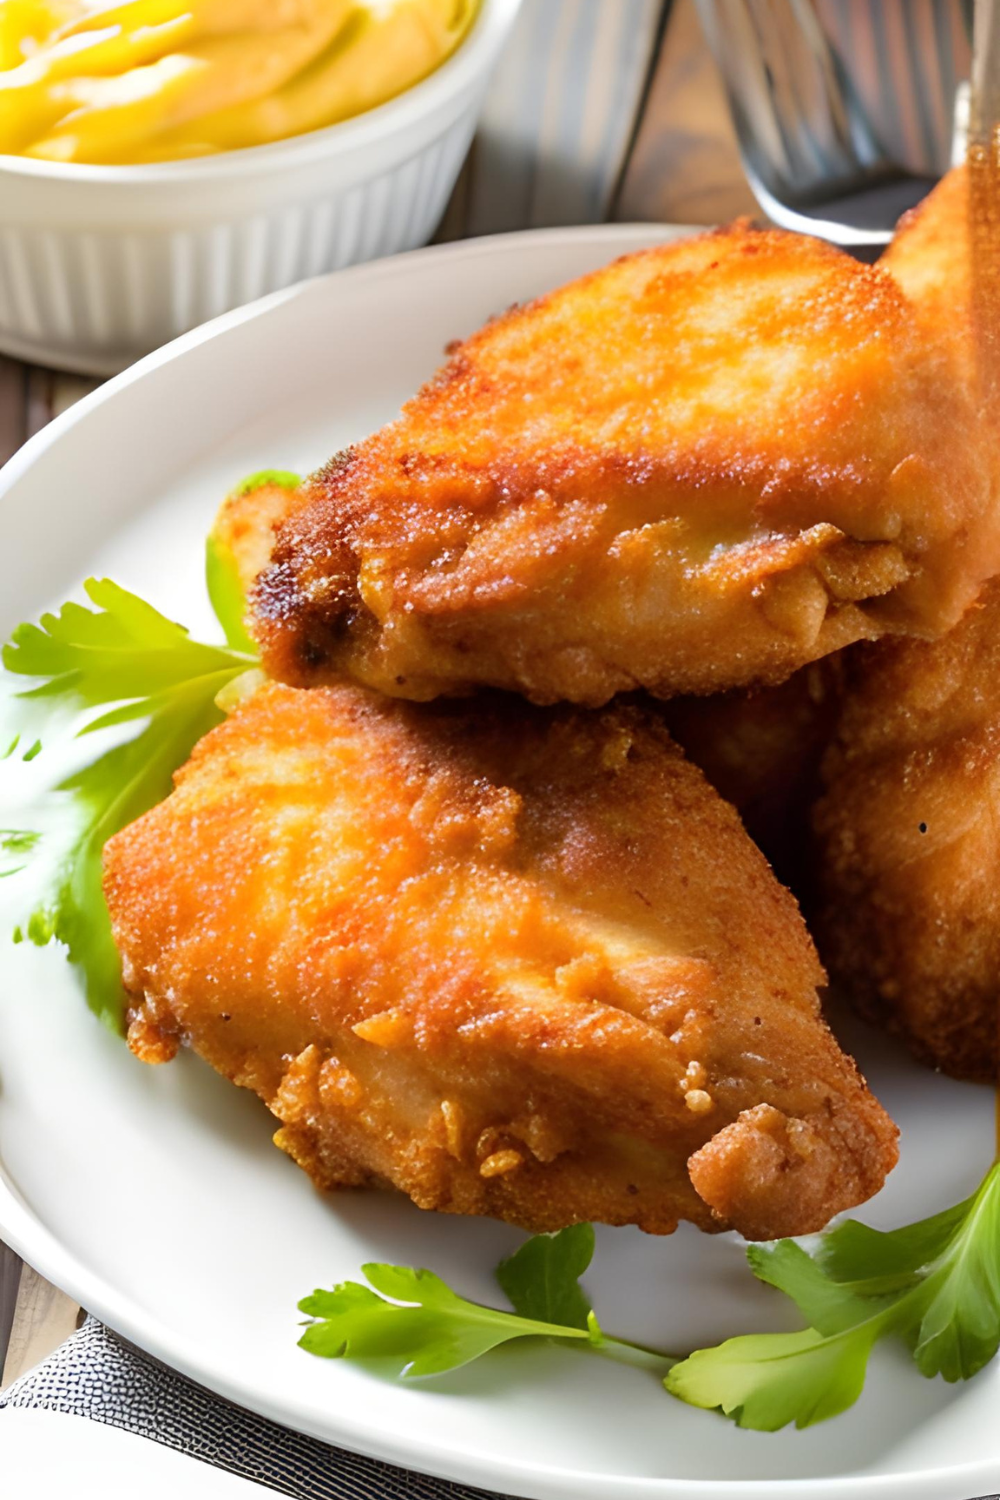 Southern-style Fried Chicken recipe without Buttermilk